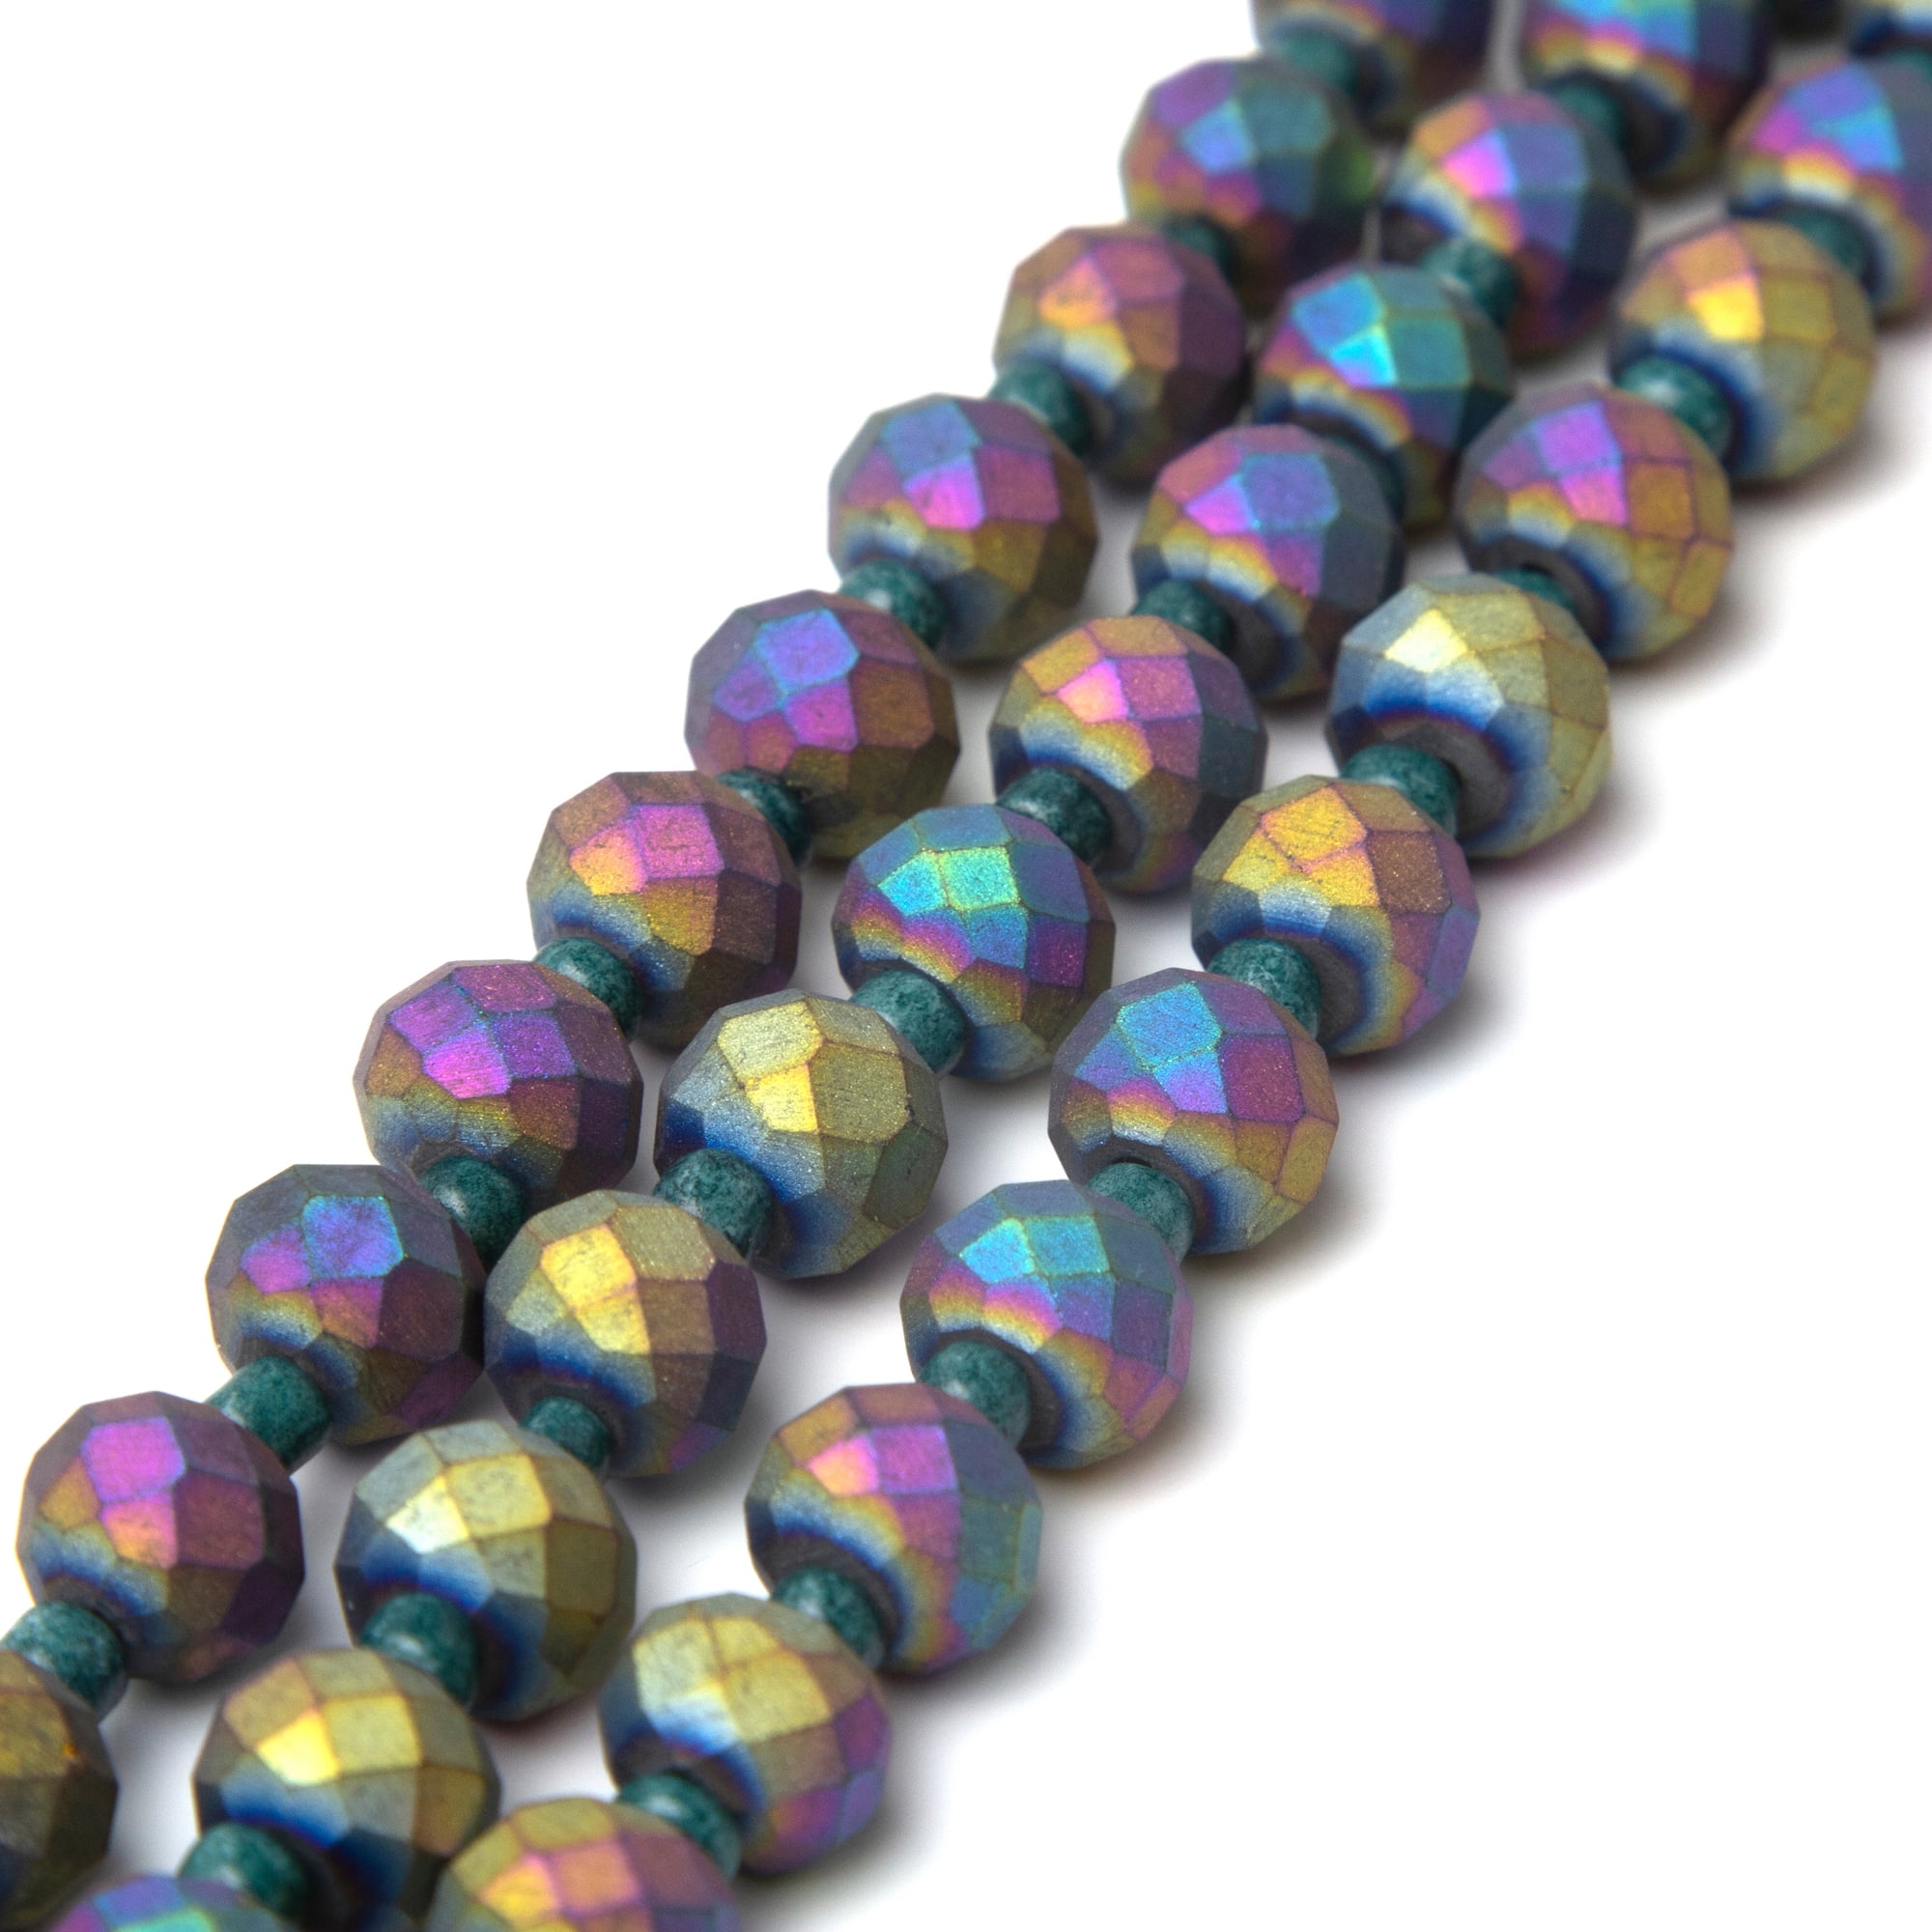 8 Strand Multi Stone Faceted Coin Shape Beads Multi Color Gemstone Beads Semi Precious 7-9mm Craft Supply